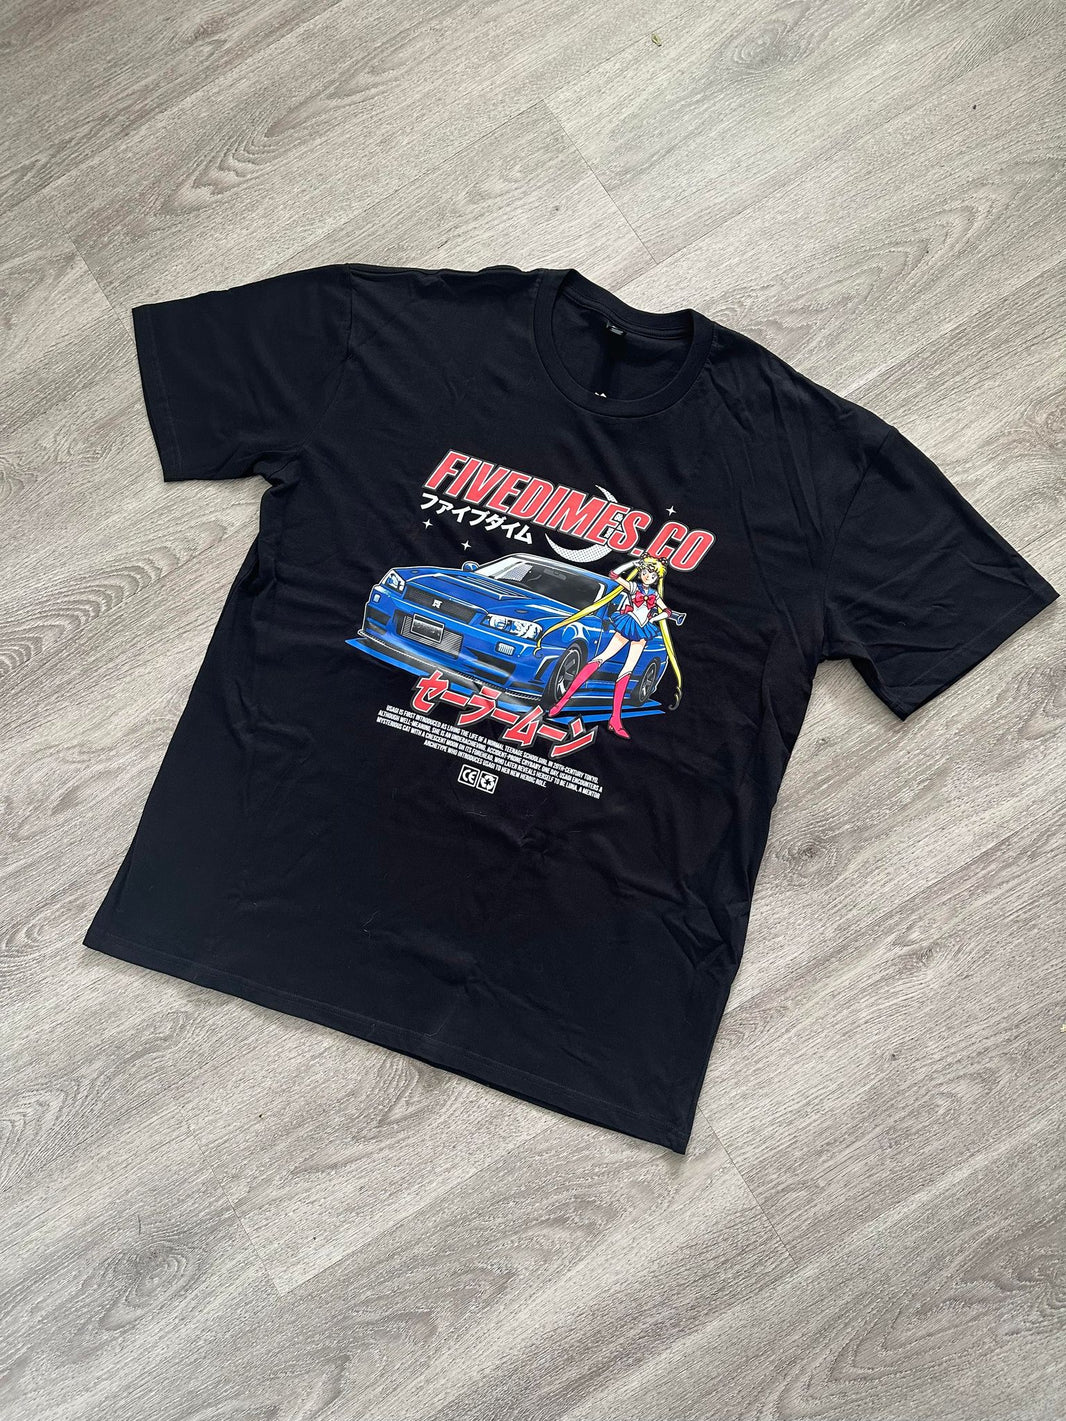 Tsurikawas, apparel, stickers and accessories for all car enthusiasts ...